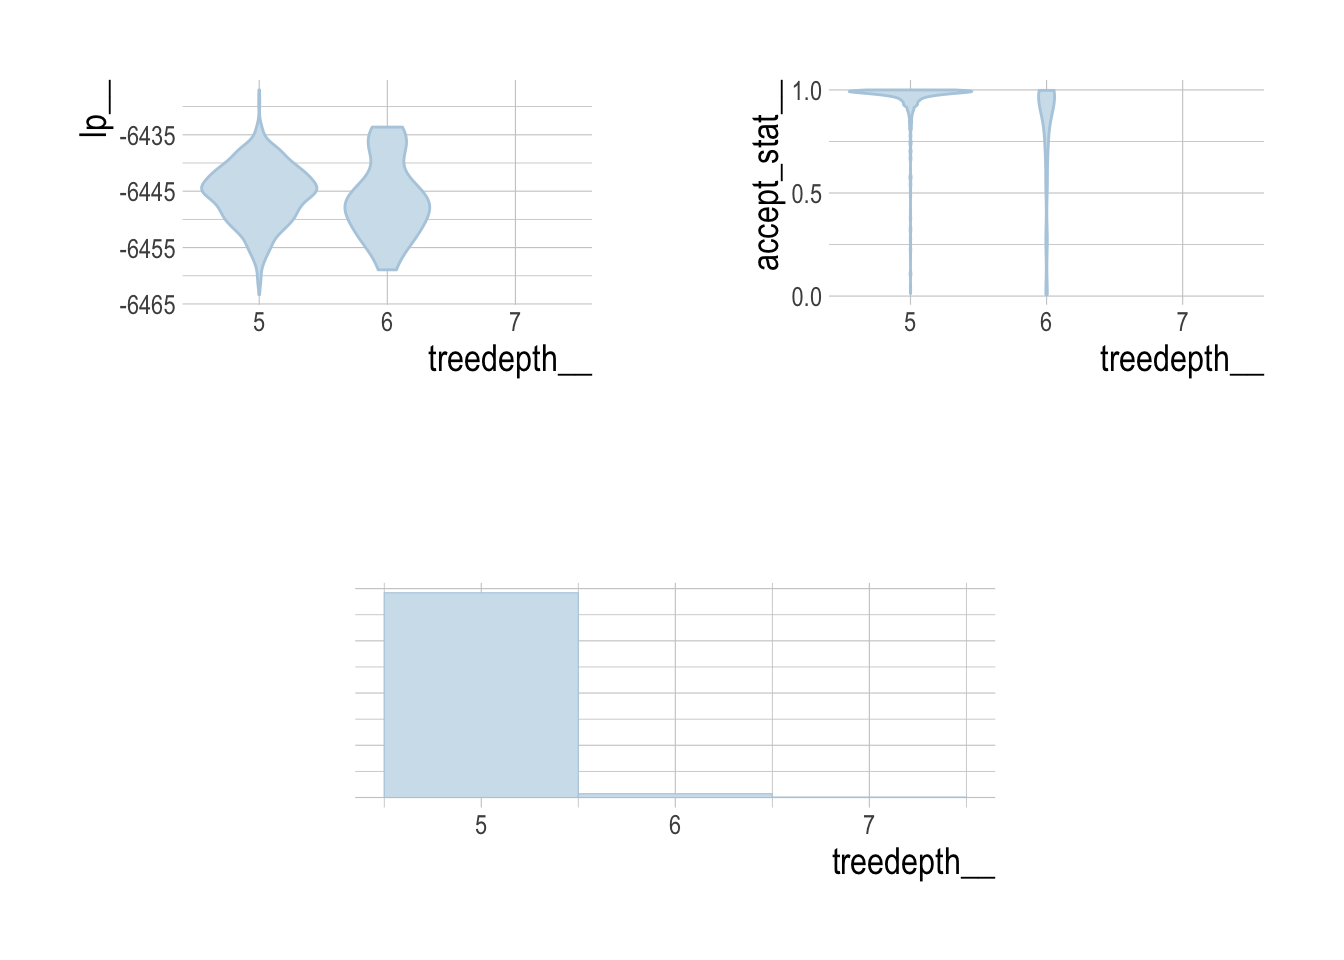 Log posterior, acceptance stat, and counts of treedepth. Max treedepth was set to 12, which no runs exceeded